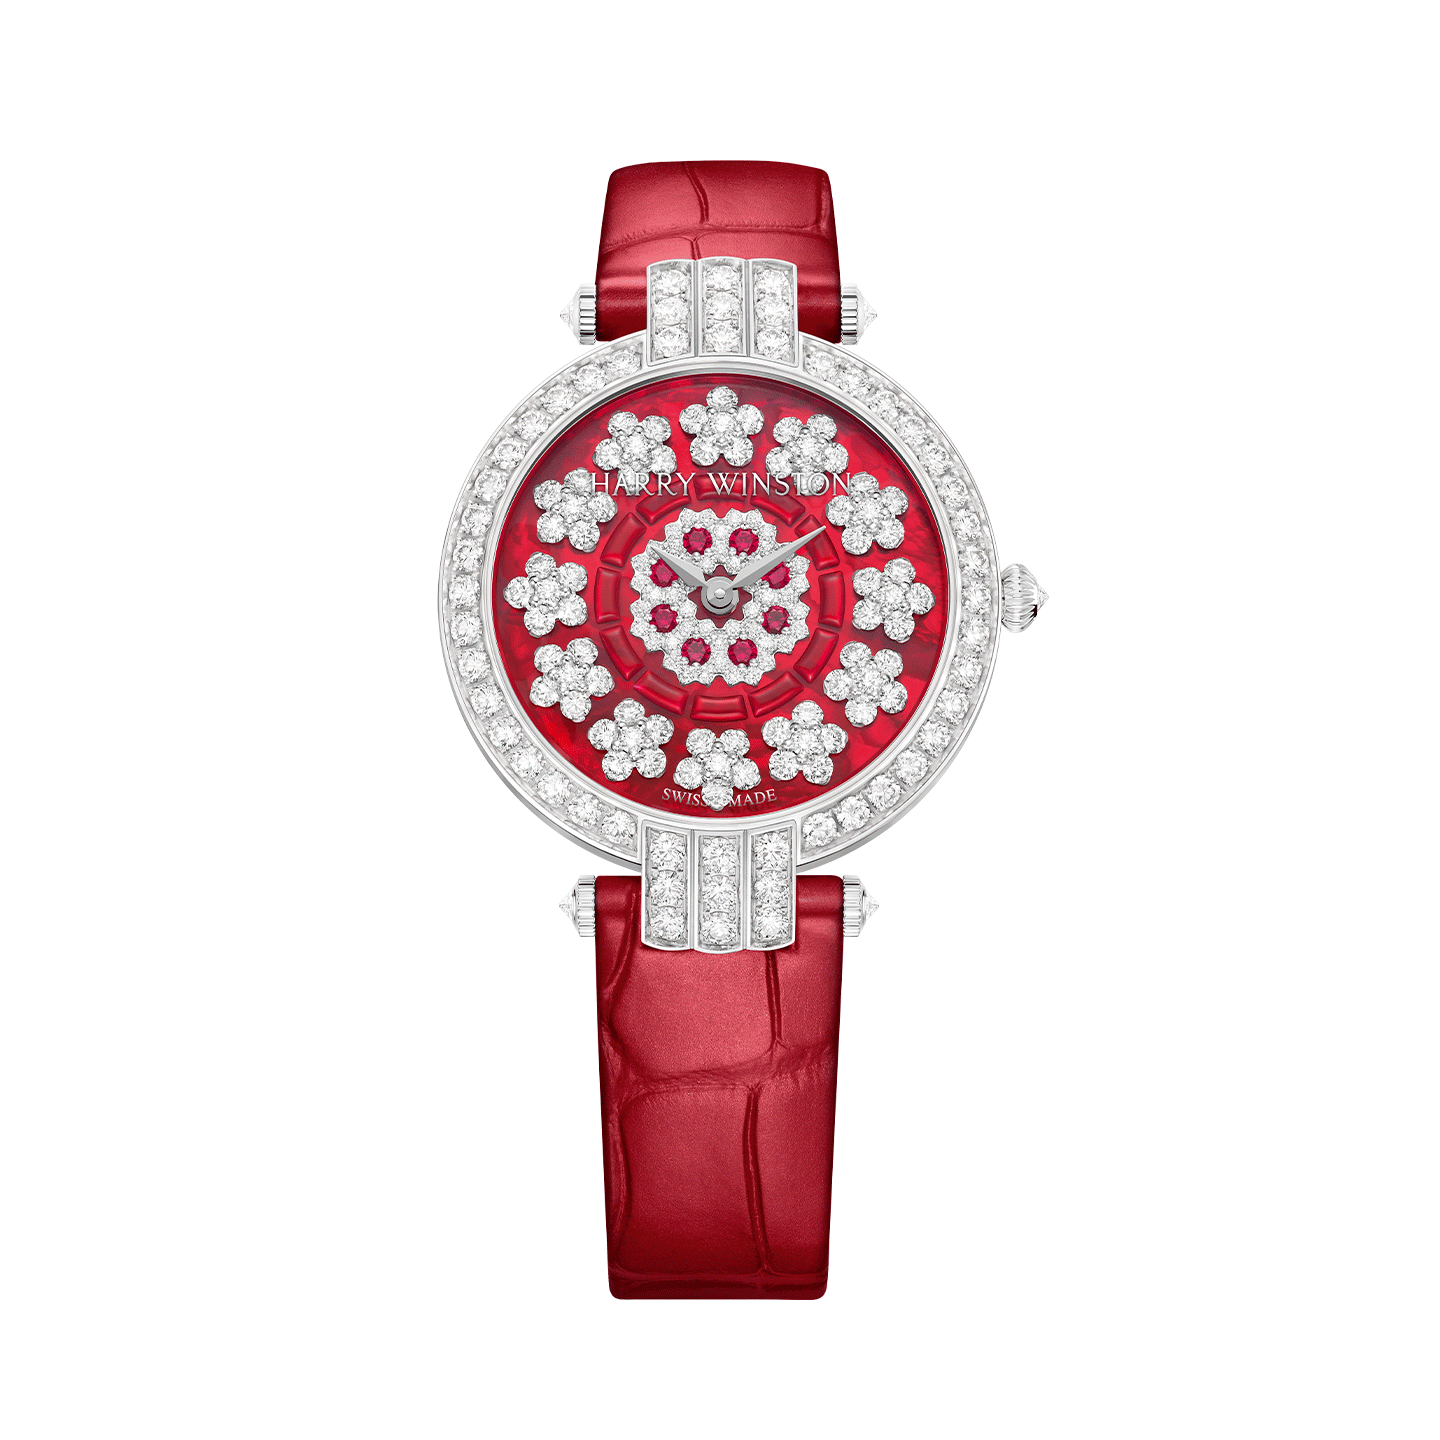 HW Harry Winston The Premier Collection | ハリー・ウィンストン